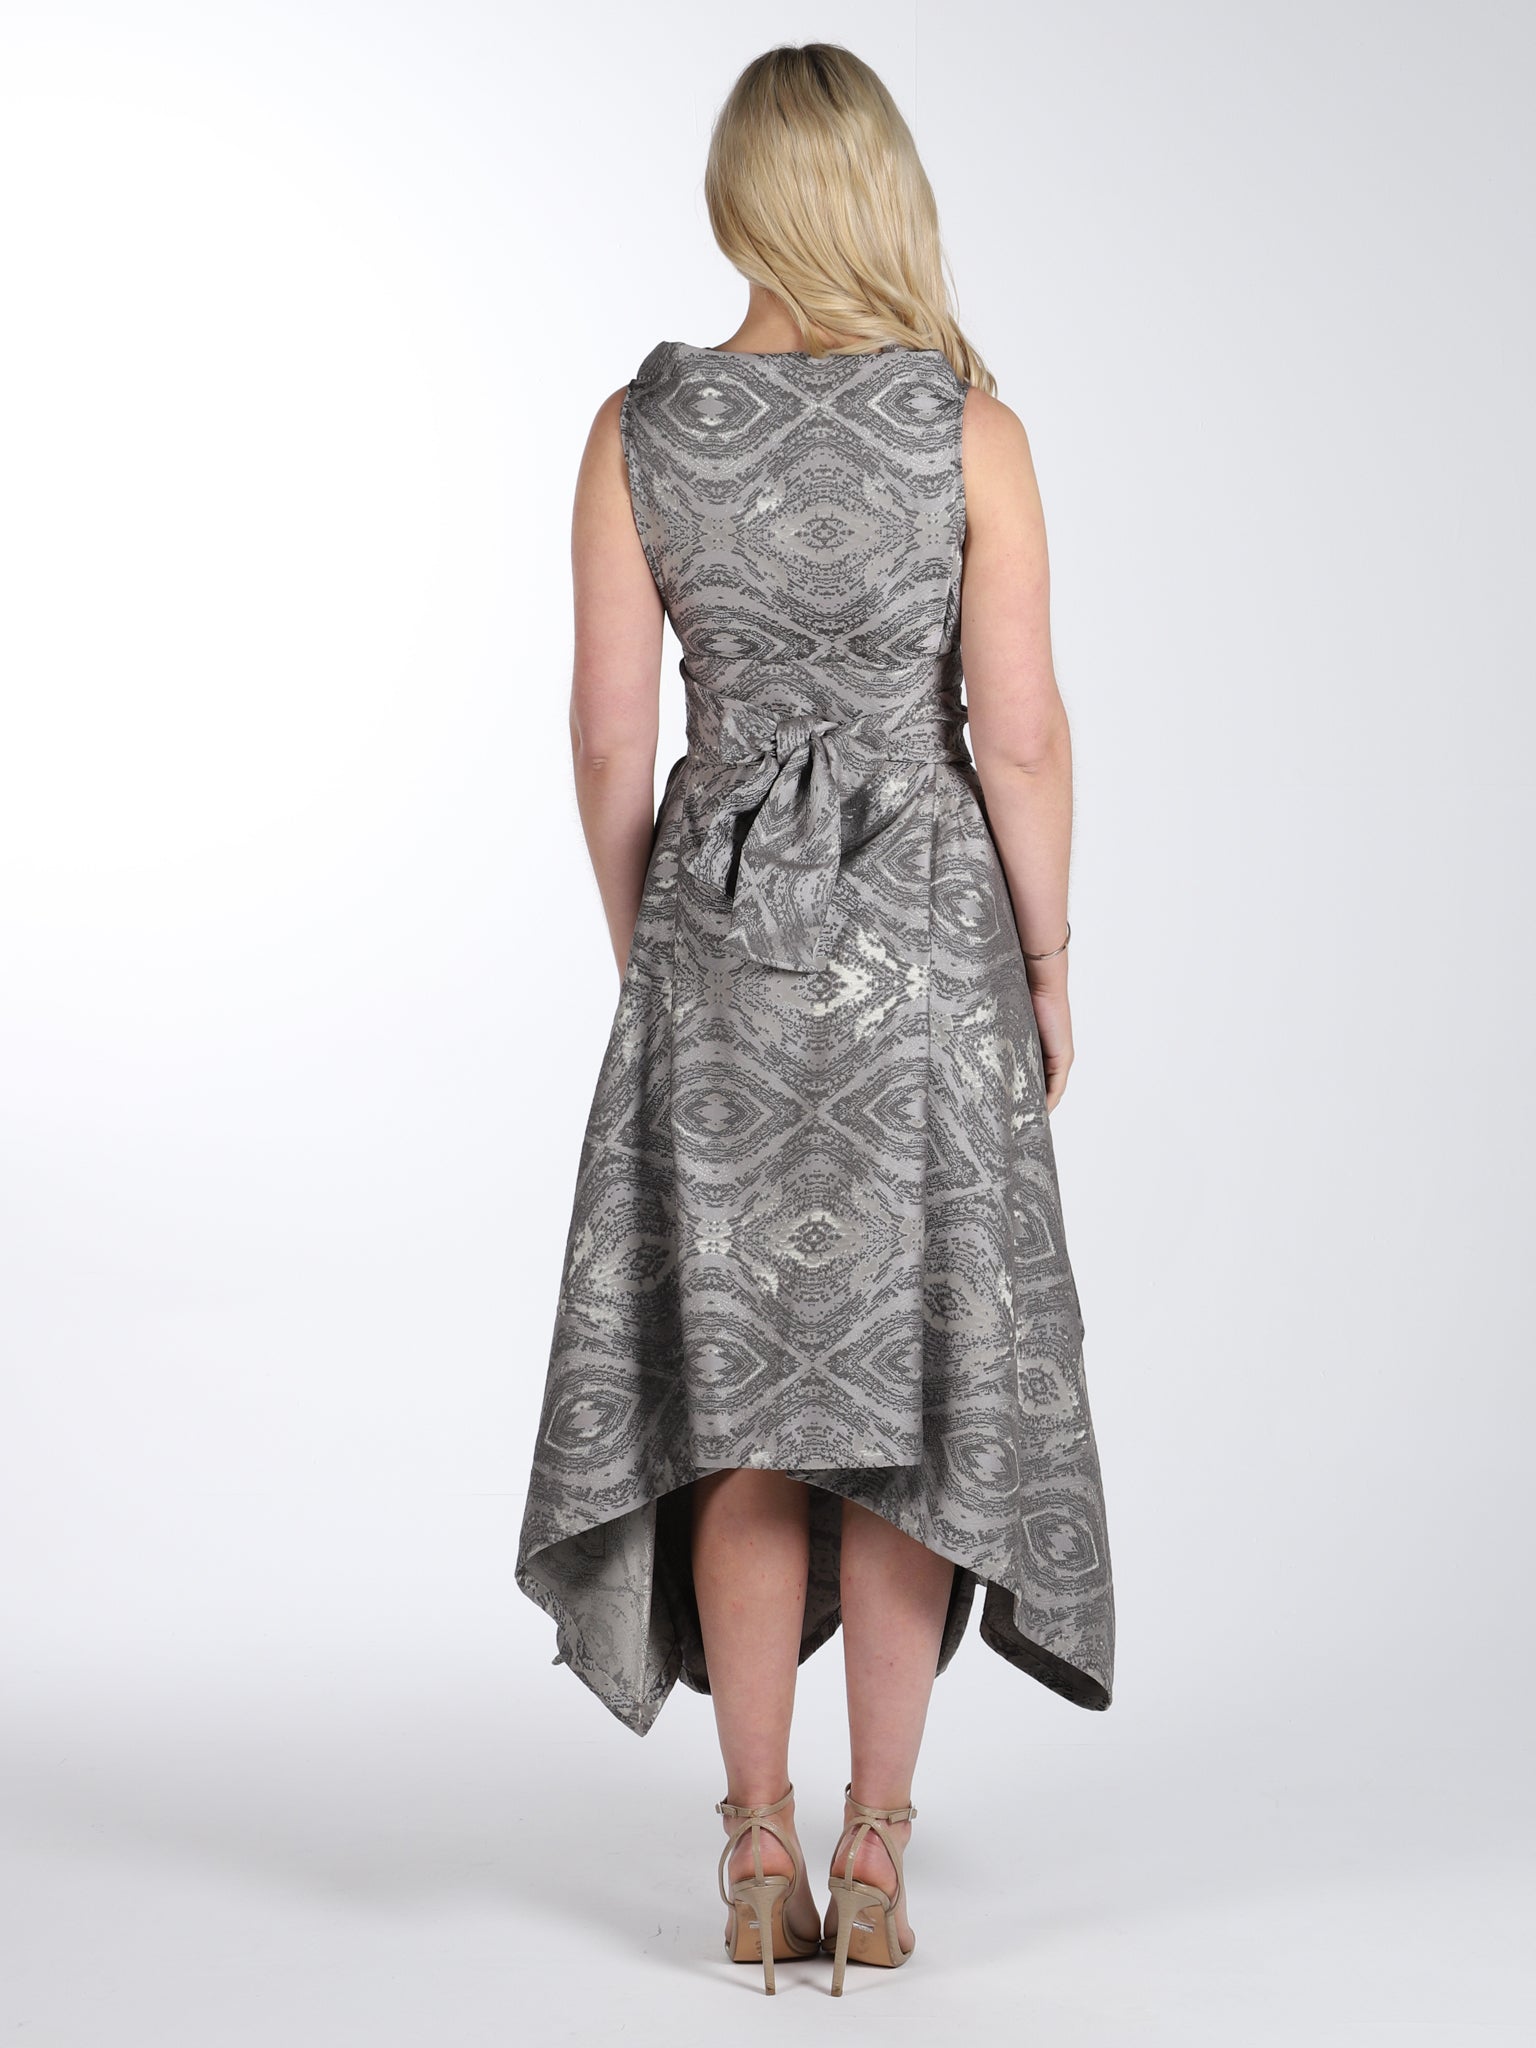 Shades of Silver Darcy Dress